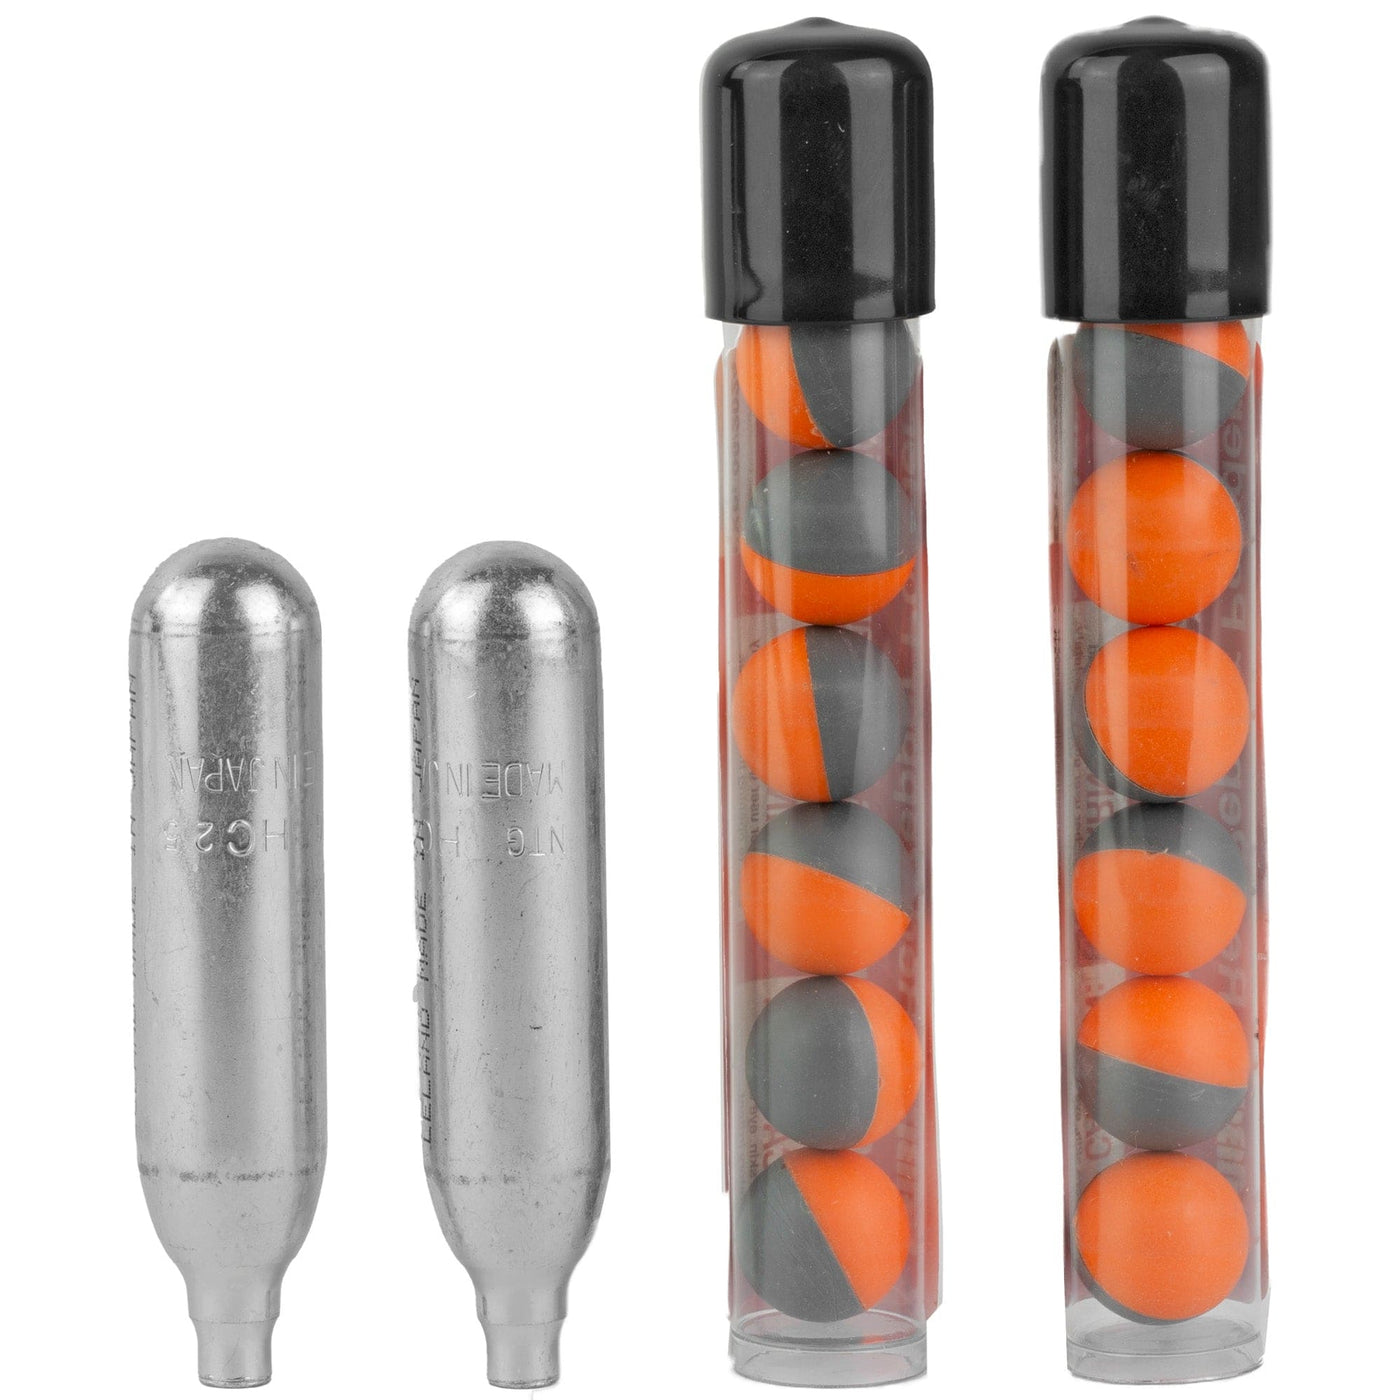 Sabre Sabre Home Defense Launcher Refill Kit 14 Red Pepper Powder Balls And 2 C02 Cartridges Non-Lethal Defense